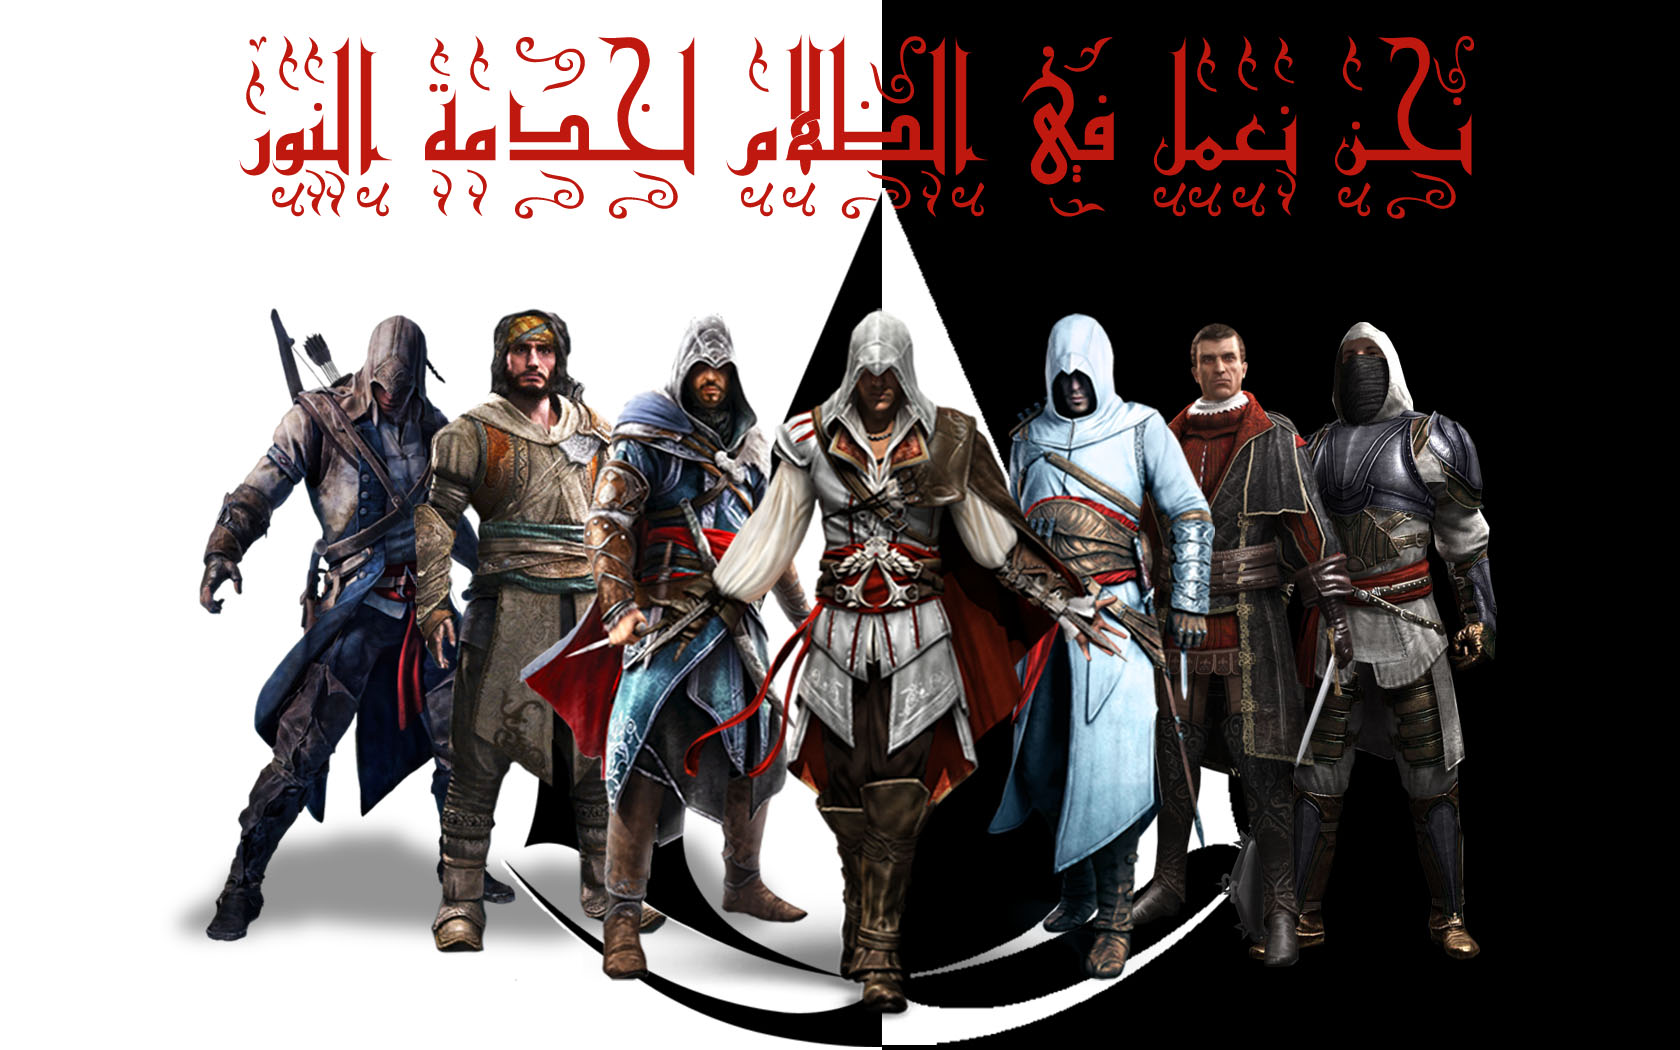 video game, assassin's creed, altair (assassin's creed), ezio (assassin's creed)